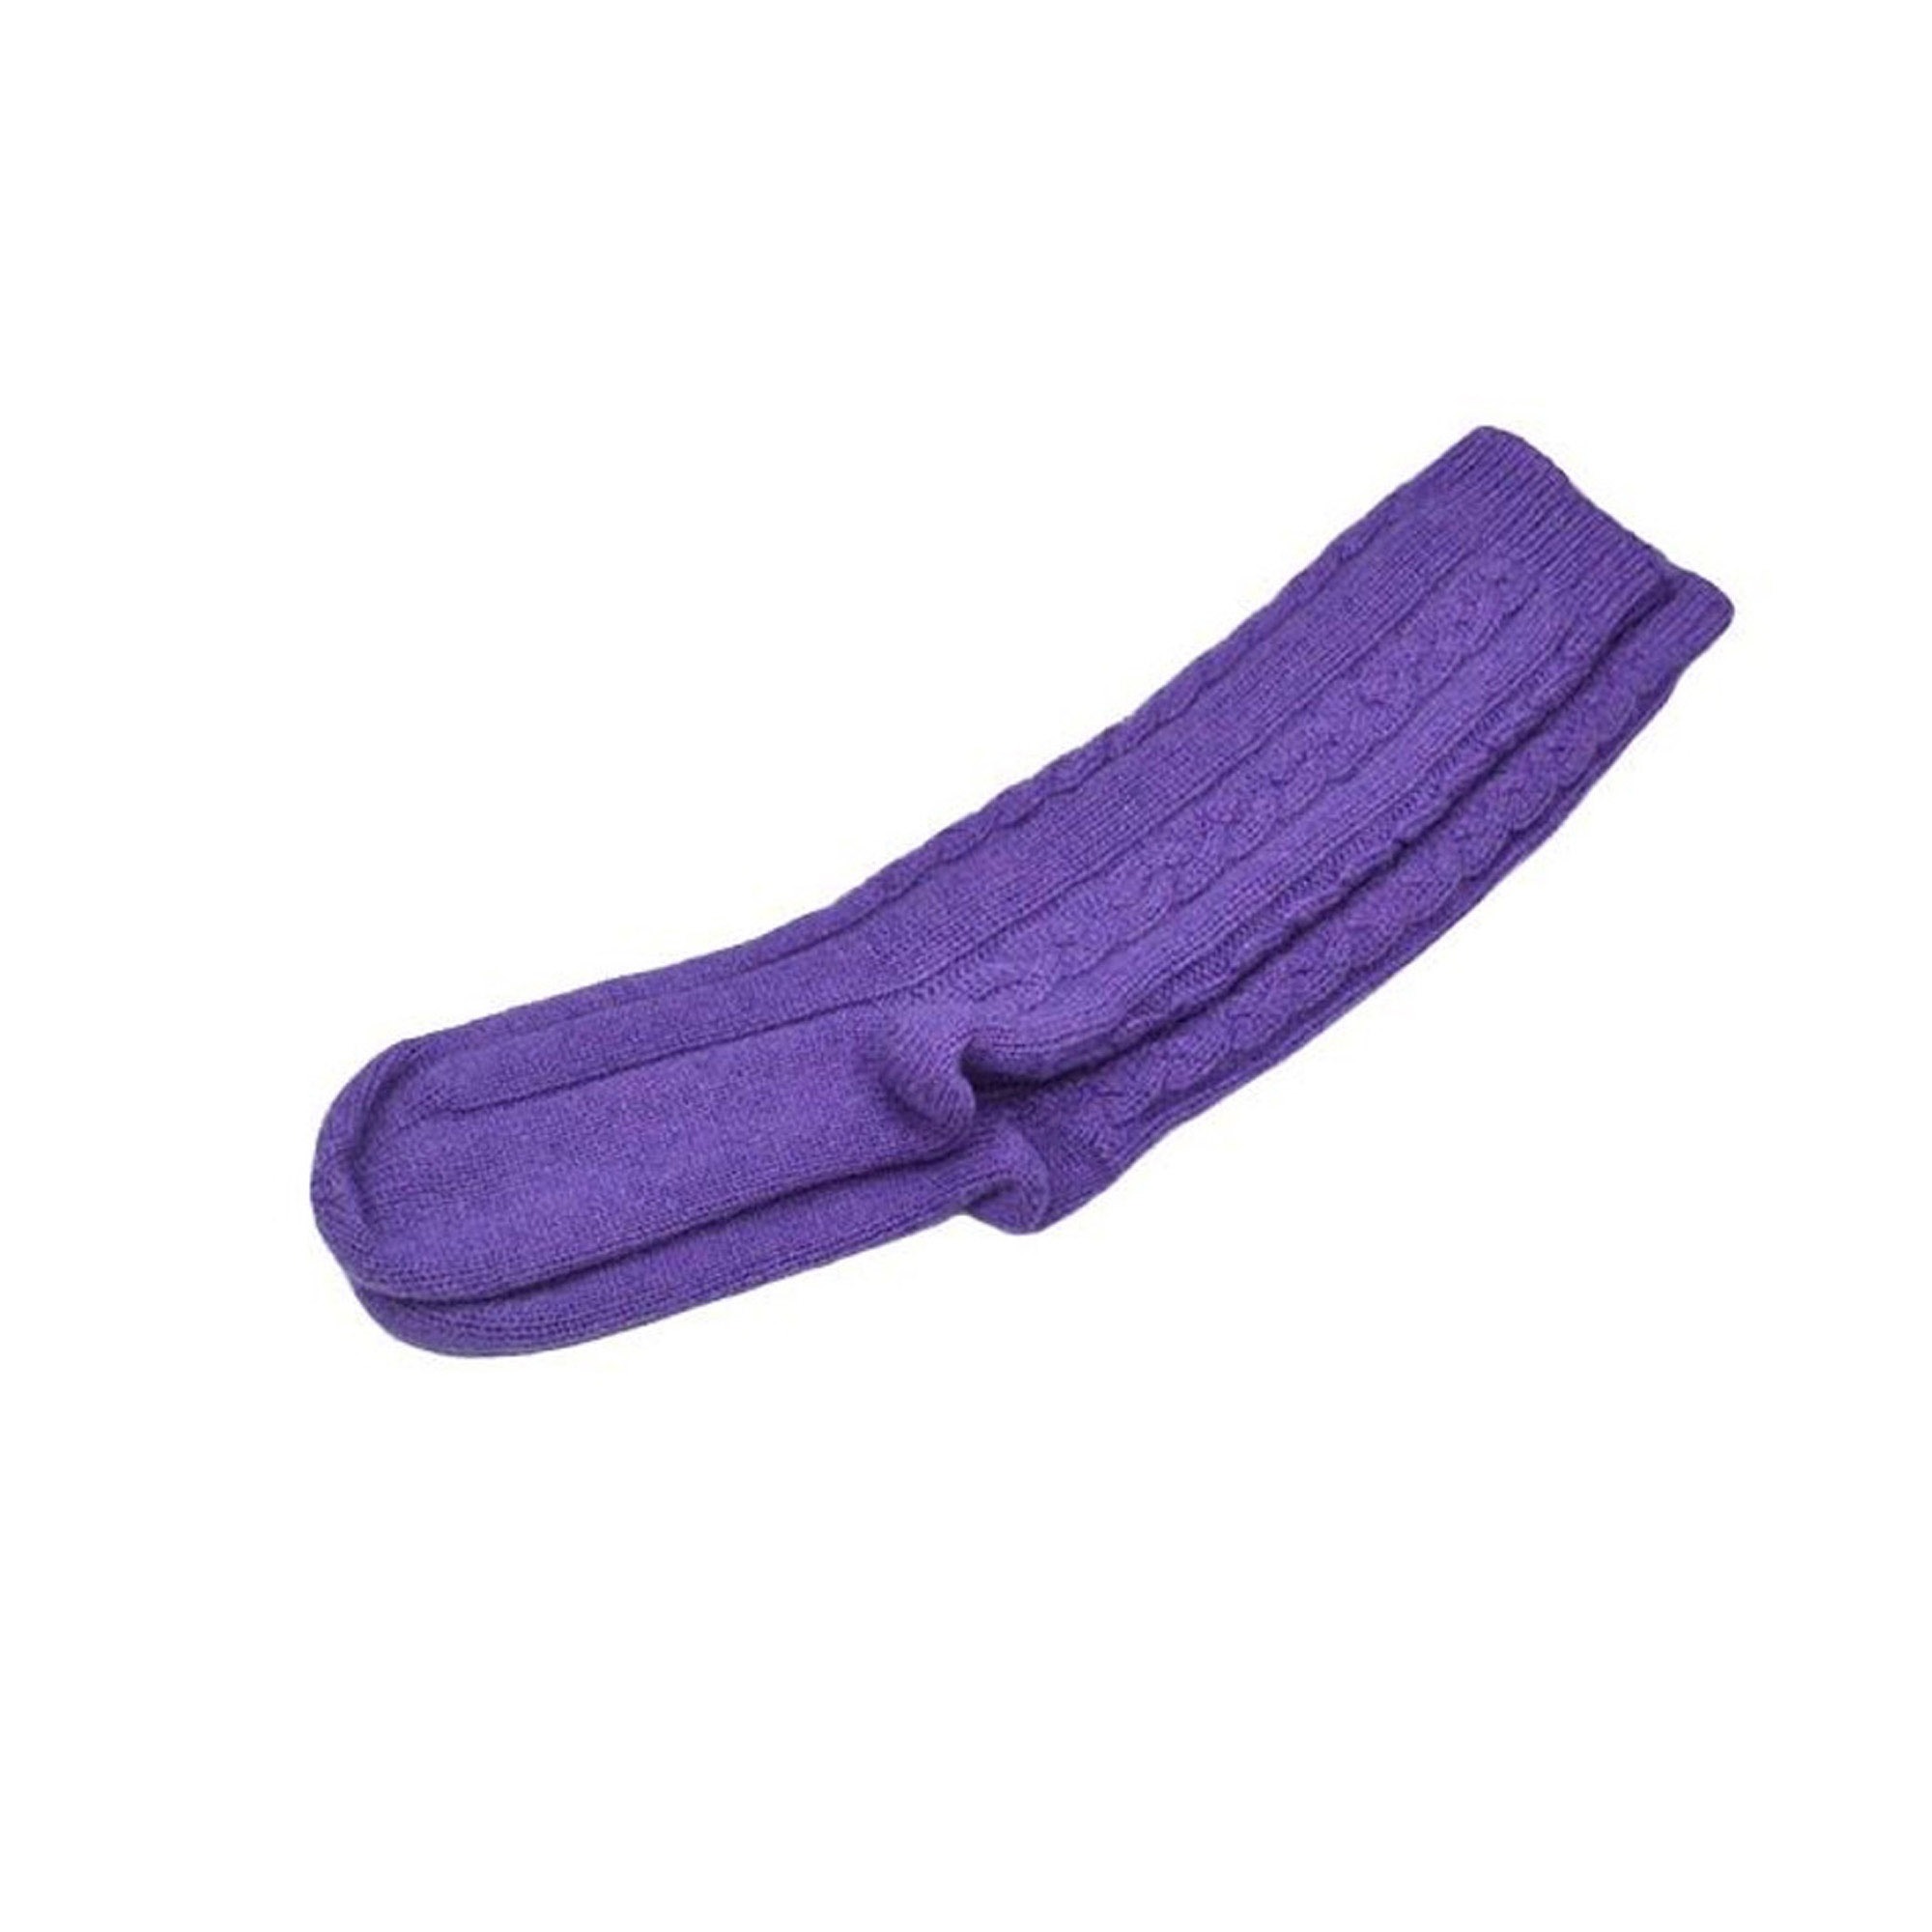 Cable Cashmere Bedsocks, Purple